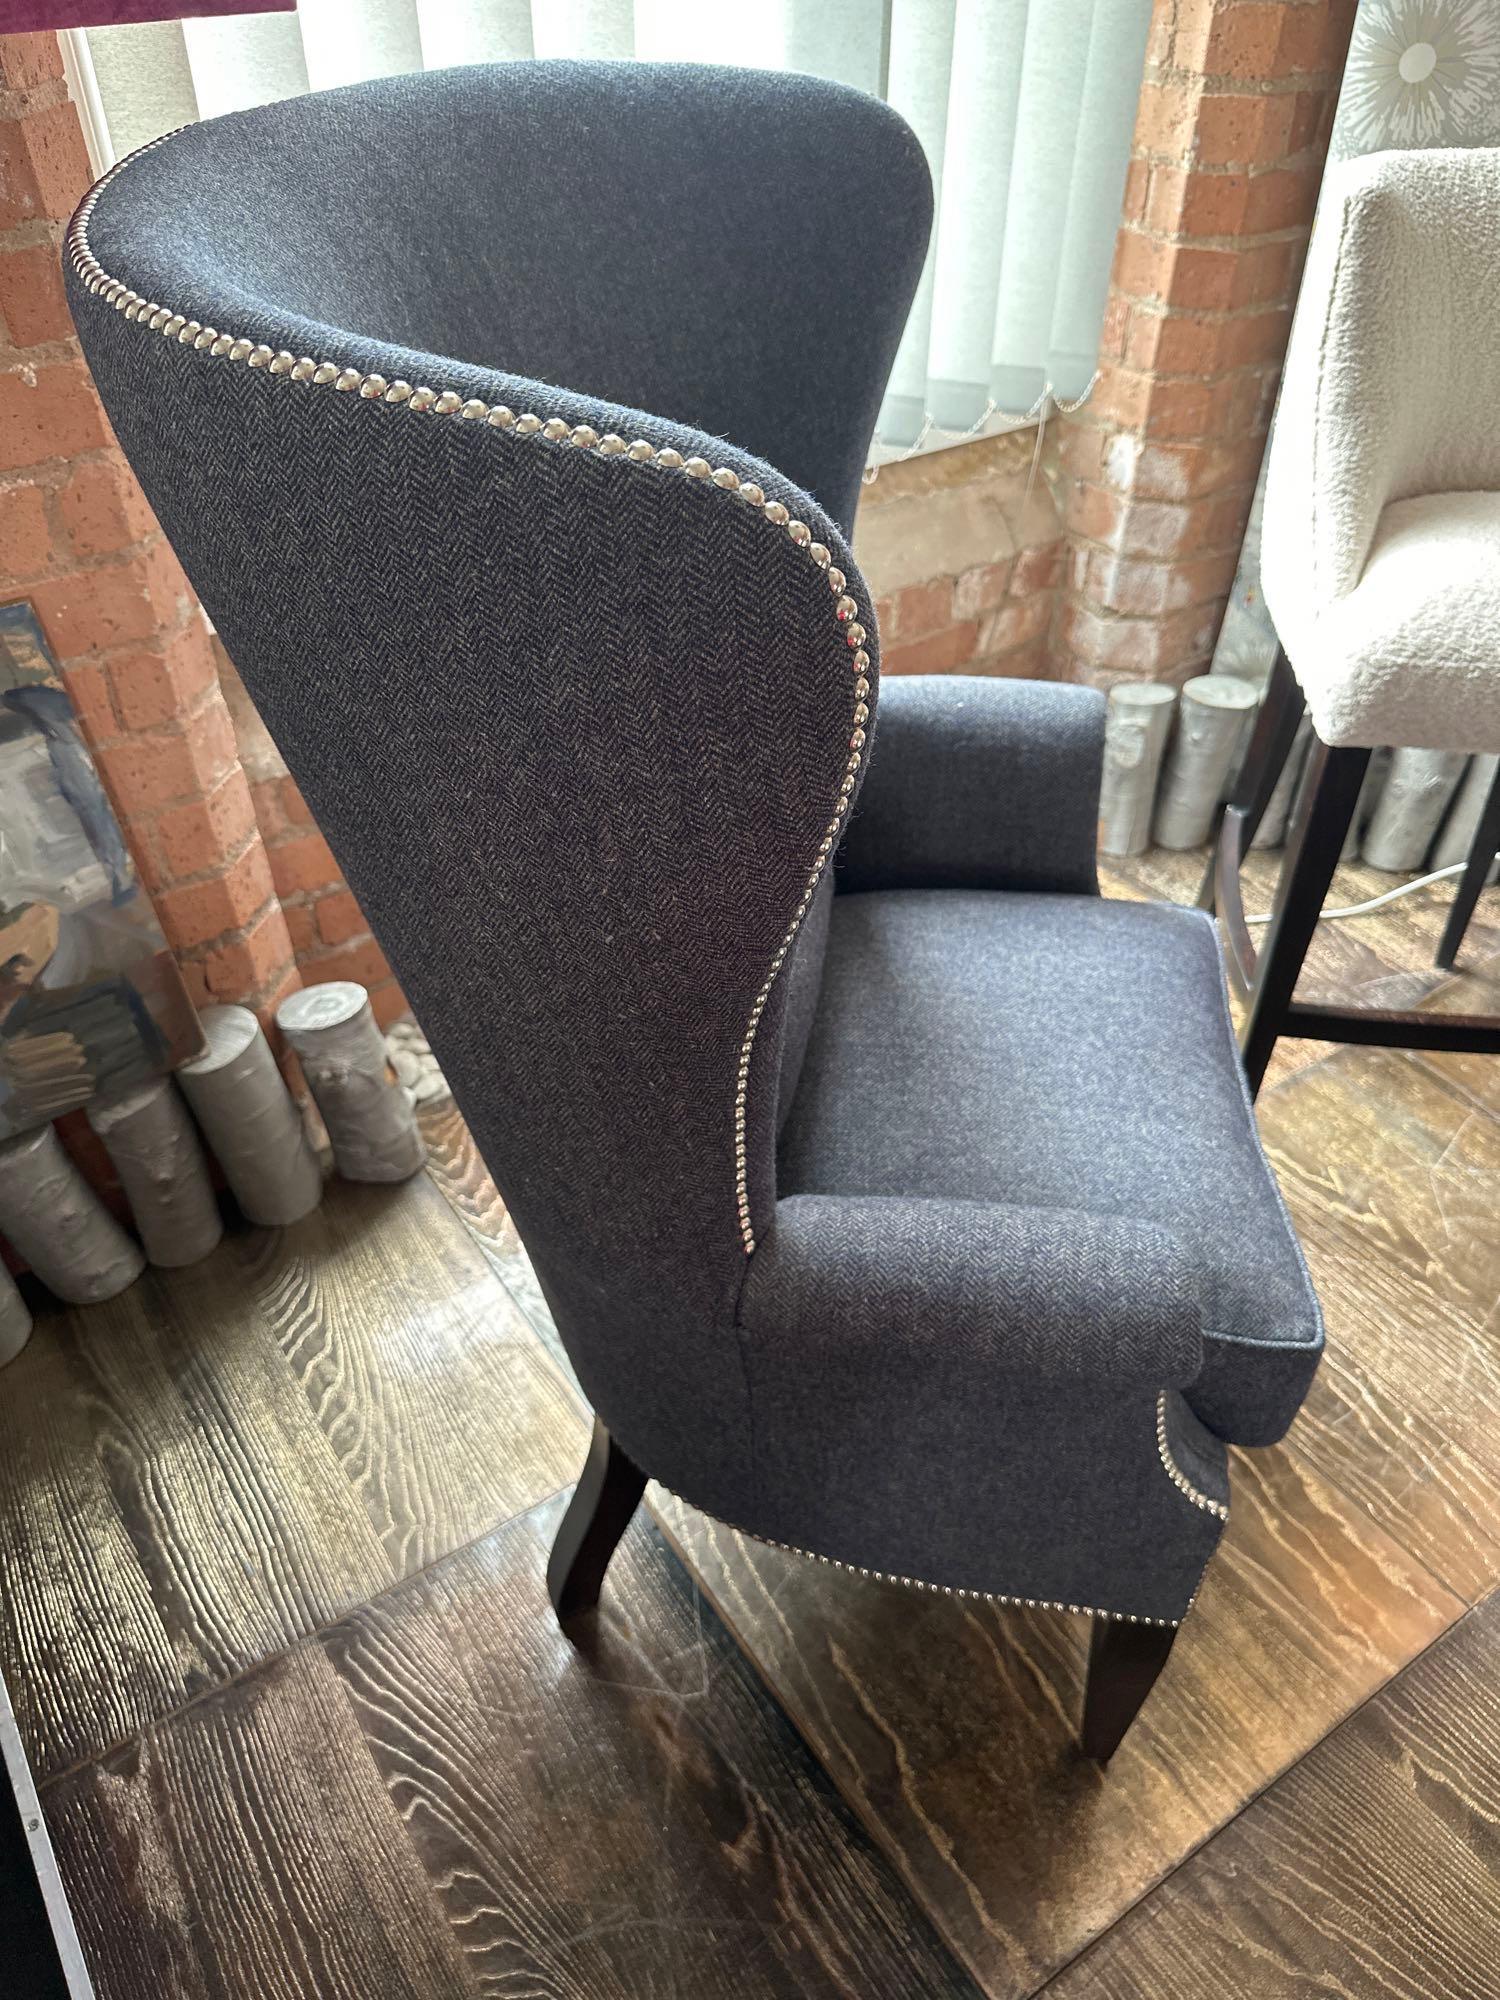 Barrel High Curved Back Wing Chair The Barrel High Curved Back Wing Chair Boasts A Distinctive - Image 4 of 5